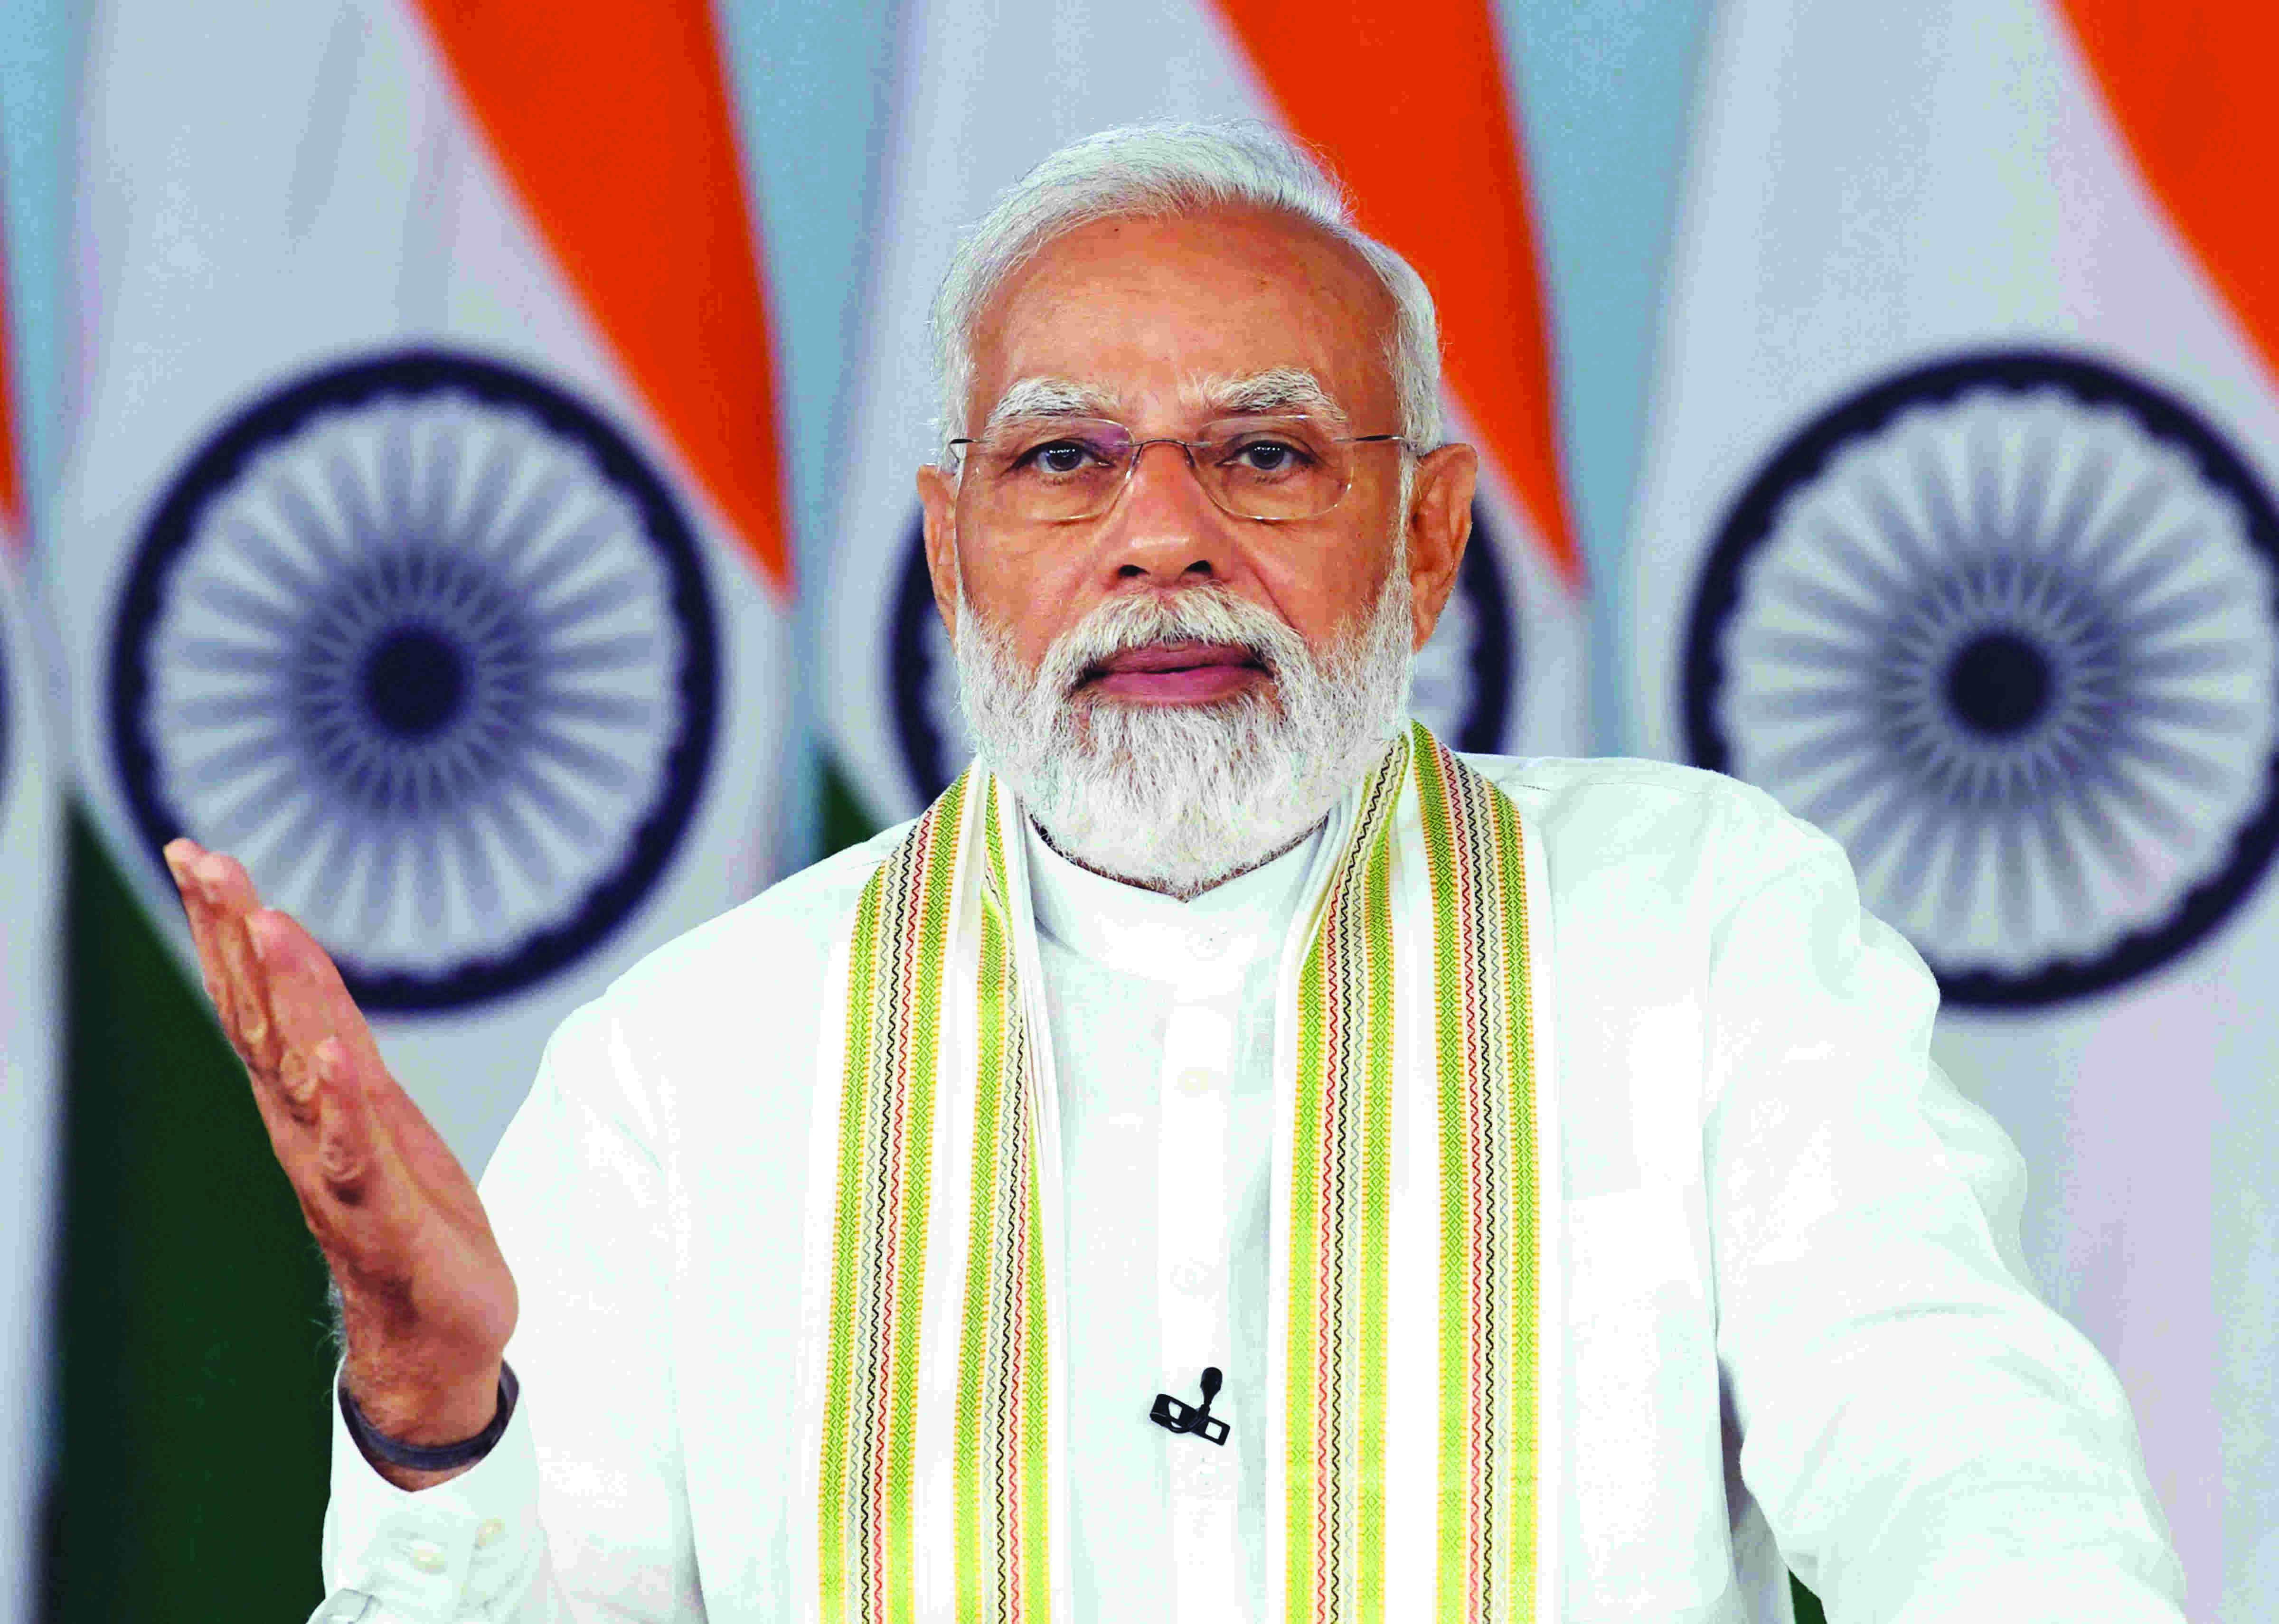 Indian economy likely to grow by 7.5%, says Modi at BRICS